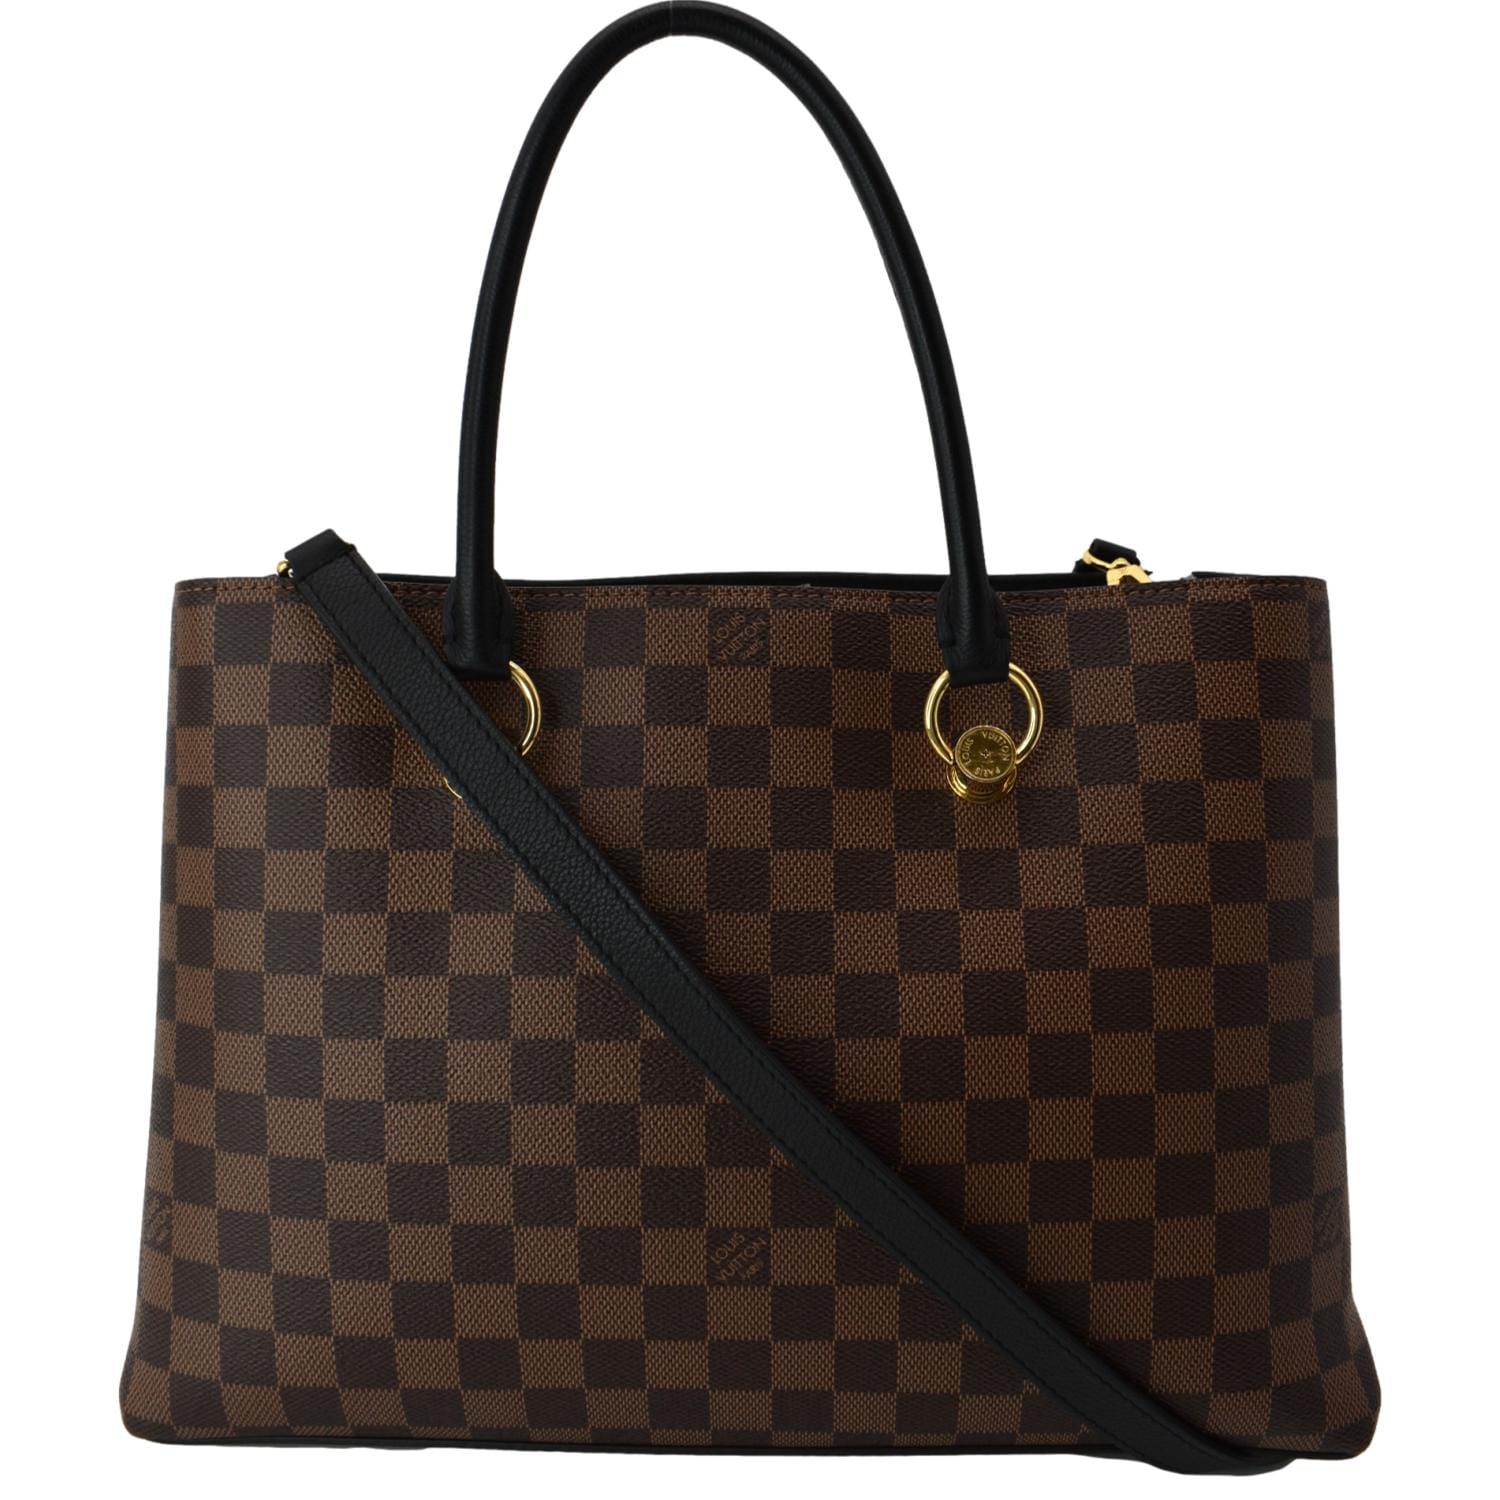 The Best from Louis Vuitton Under $2500 - Academy by FASHIONPHILE